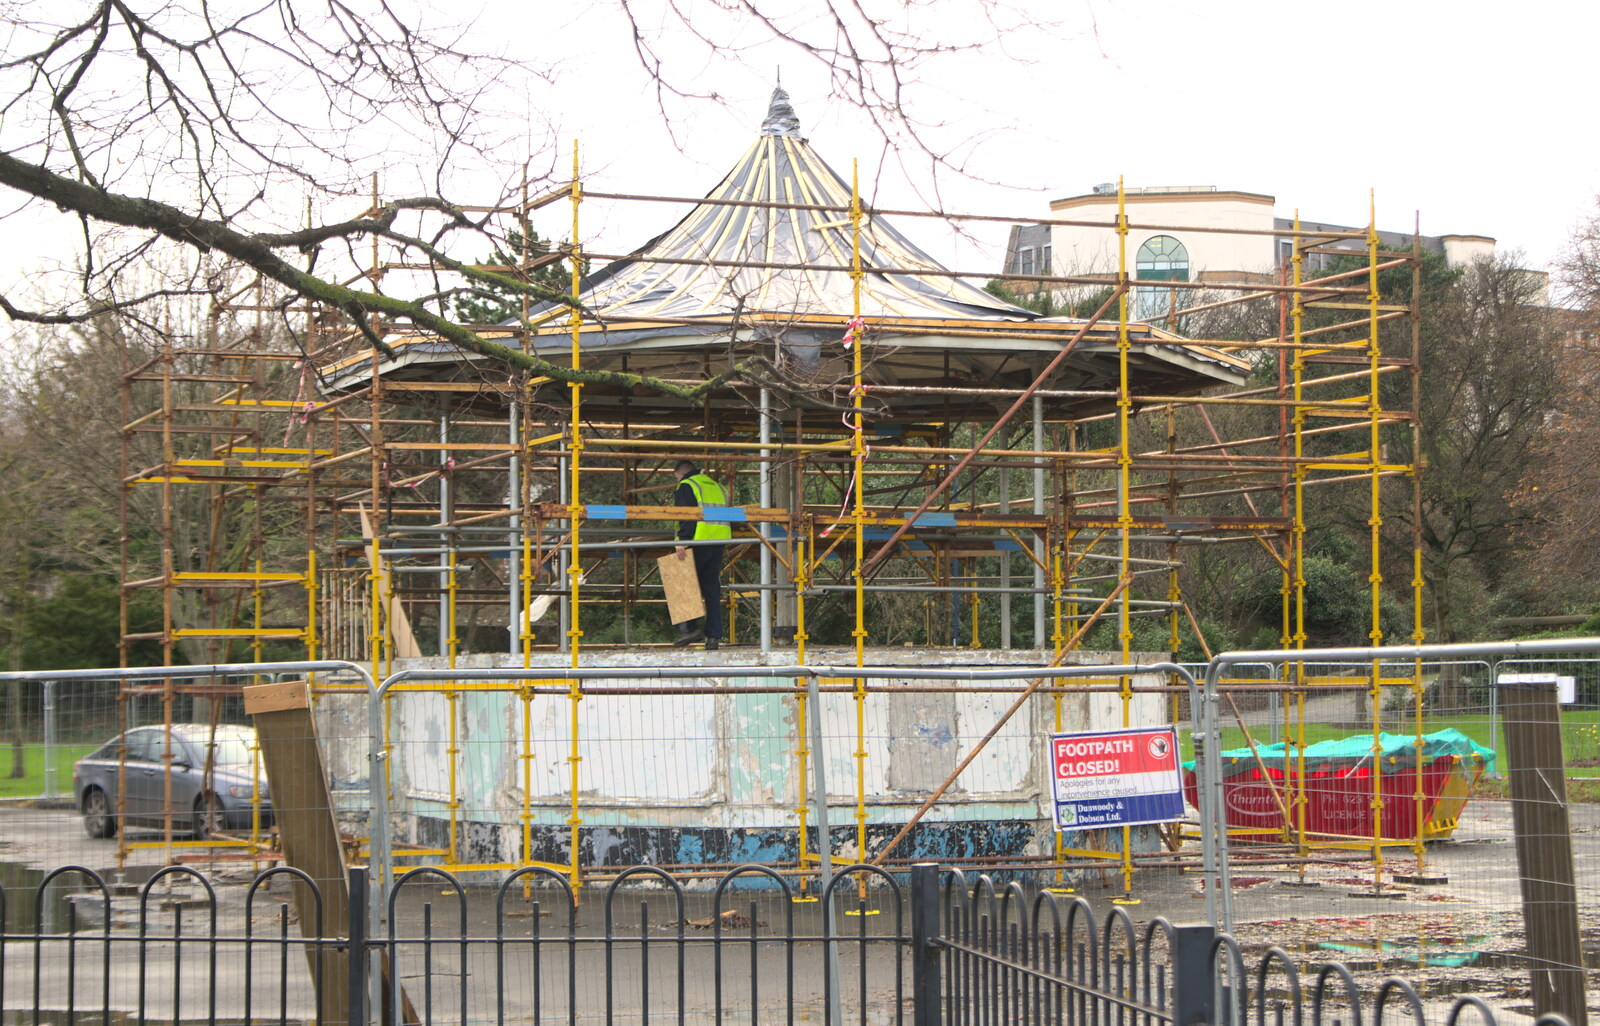 The Blackrock bandstand us being rebuilt from Conwy, Holyhead and the Ferry to Ireland - 21st December 2015